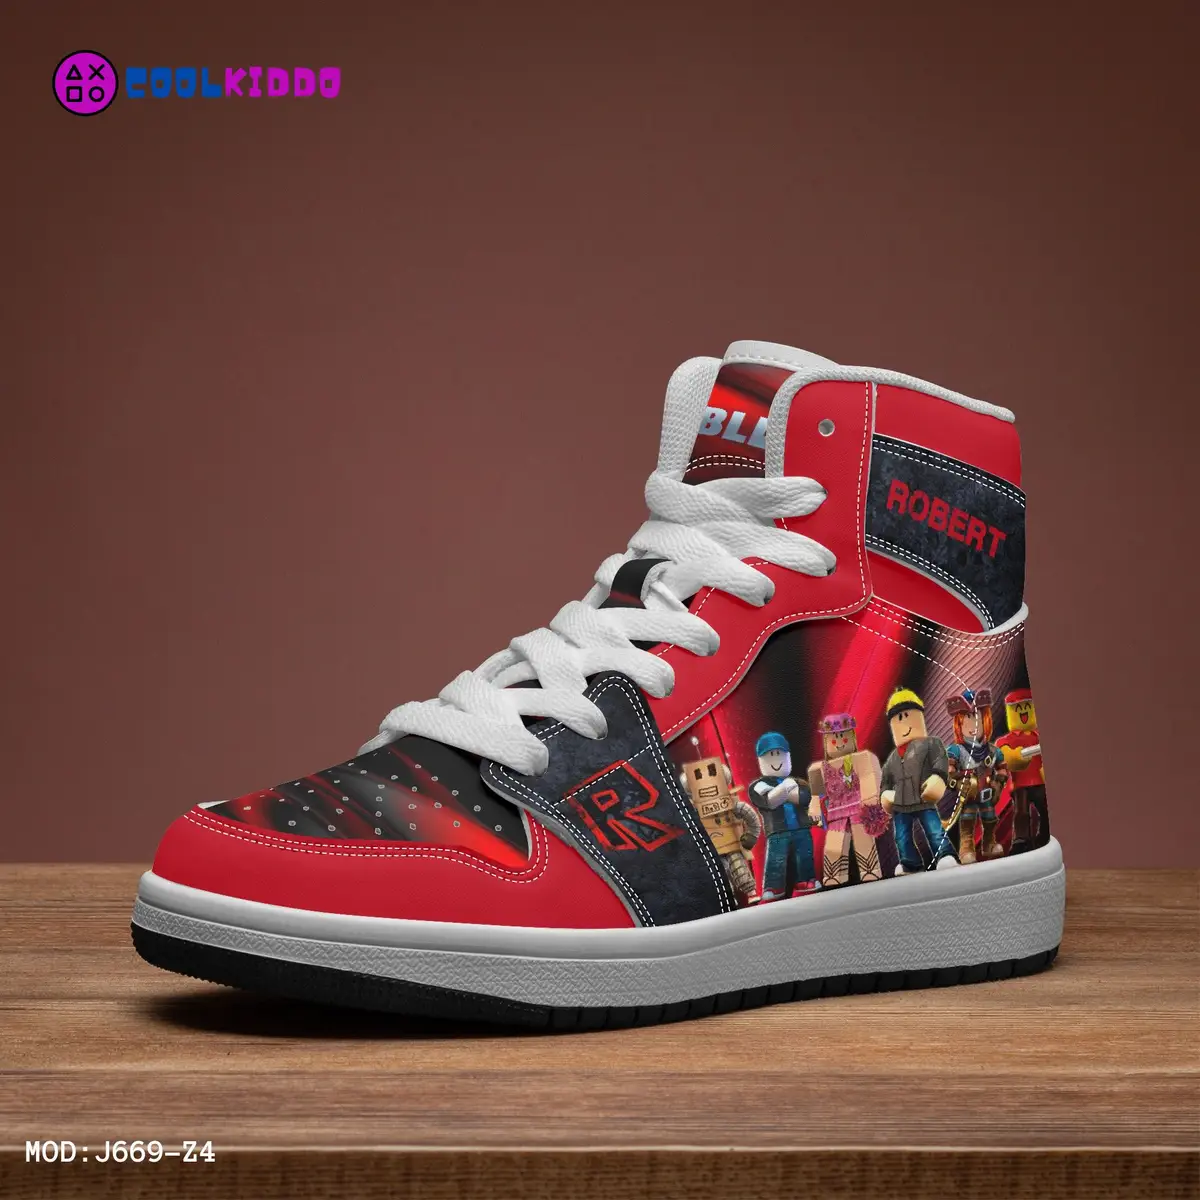 Personalized Name ROBLOX Characters High-Top Leather Black and Red Shoes, Jordans Style Sneakers Cool Kiddo 20